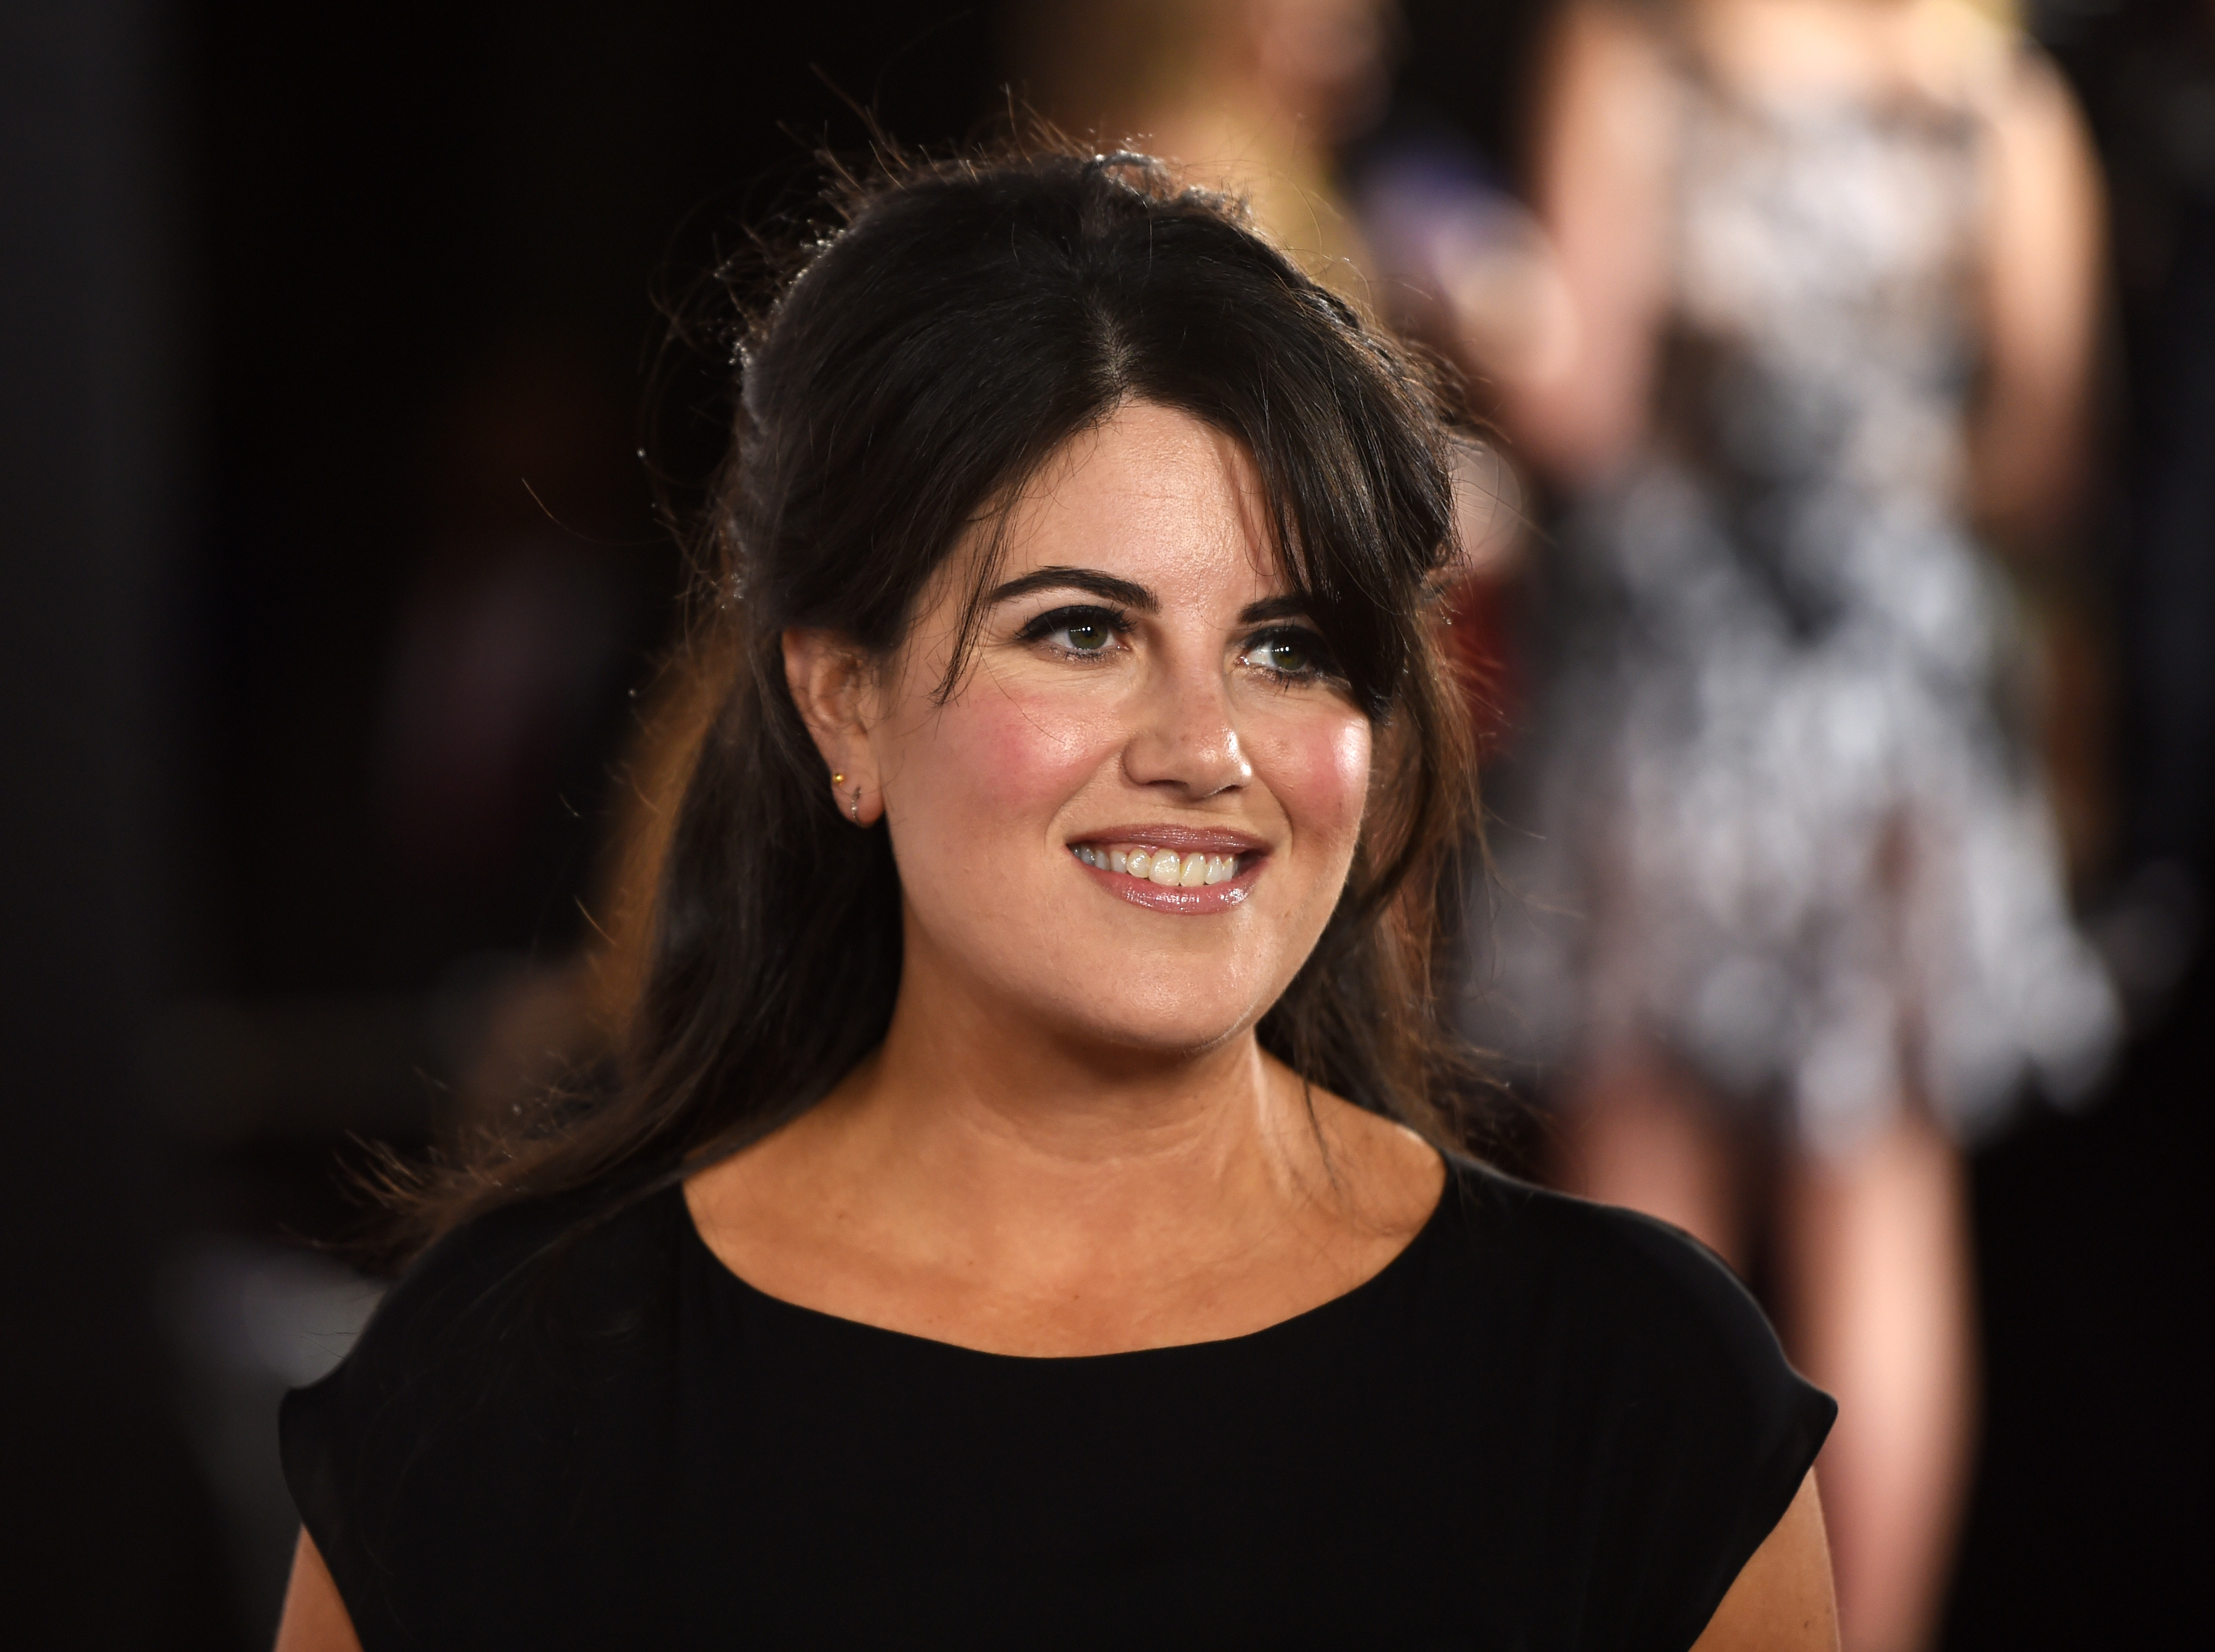 Monica Lewinsky arrives at the TrevorLIVE Los Angeles benefit event at the Hollywood Palladium on December 7, 2014 in Los Angeles, California. (Amanda Edwards—WireImage)